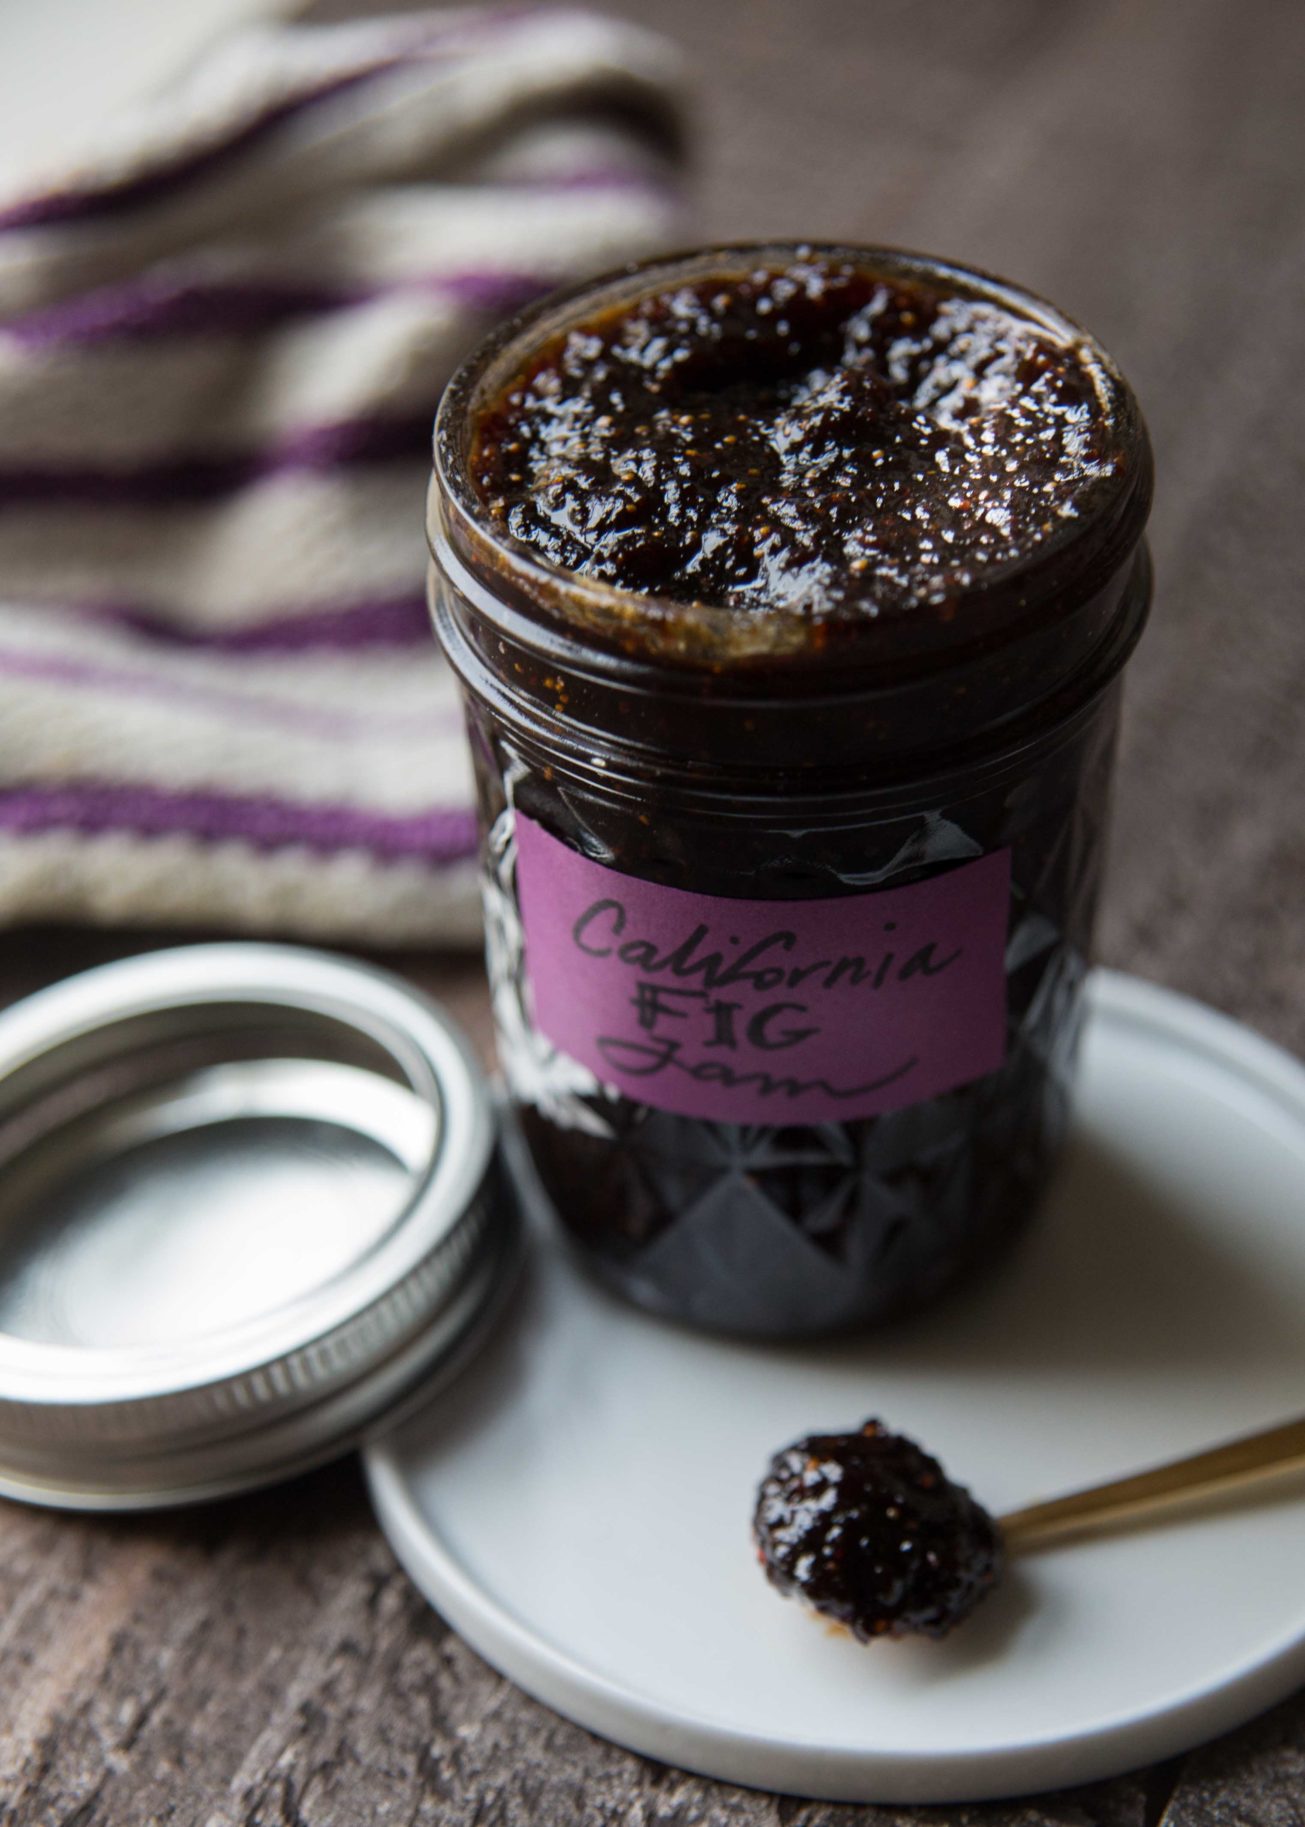 Don't wait for fresh fig season to make jam. This fig jam recipe with dried figs is something you can make year-long. Make your own fig jam from dried figs.